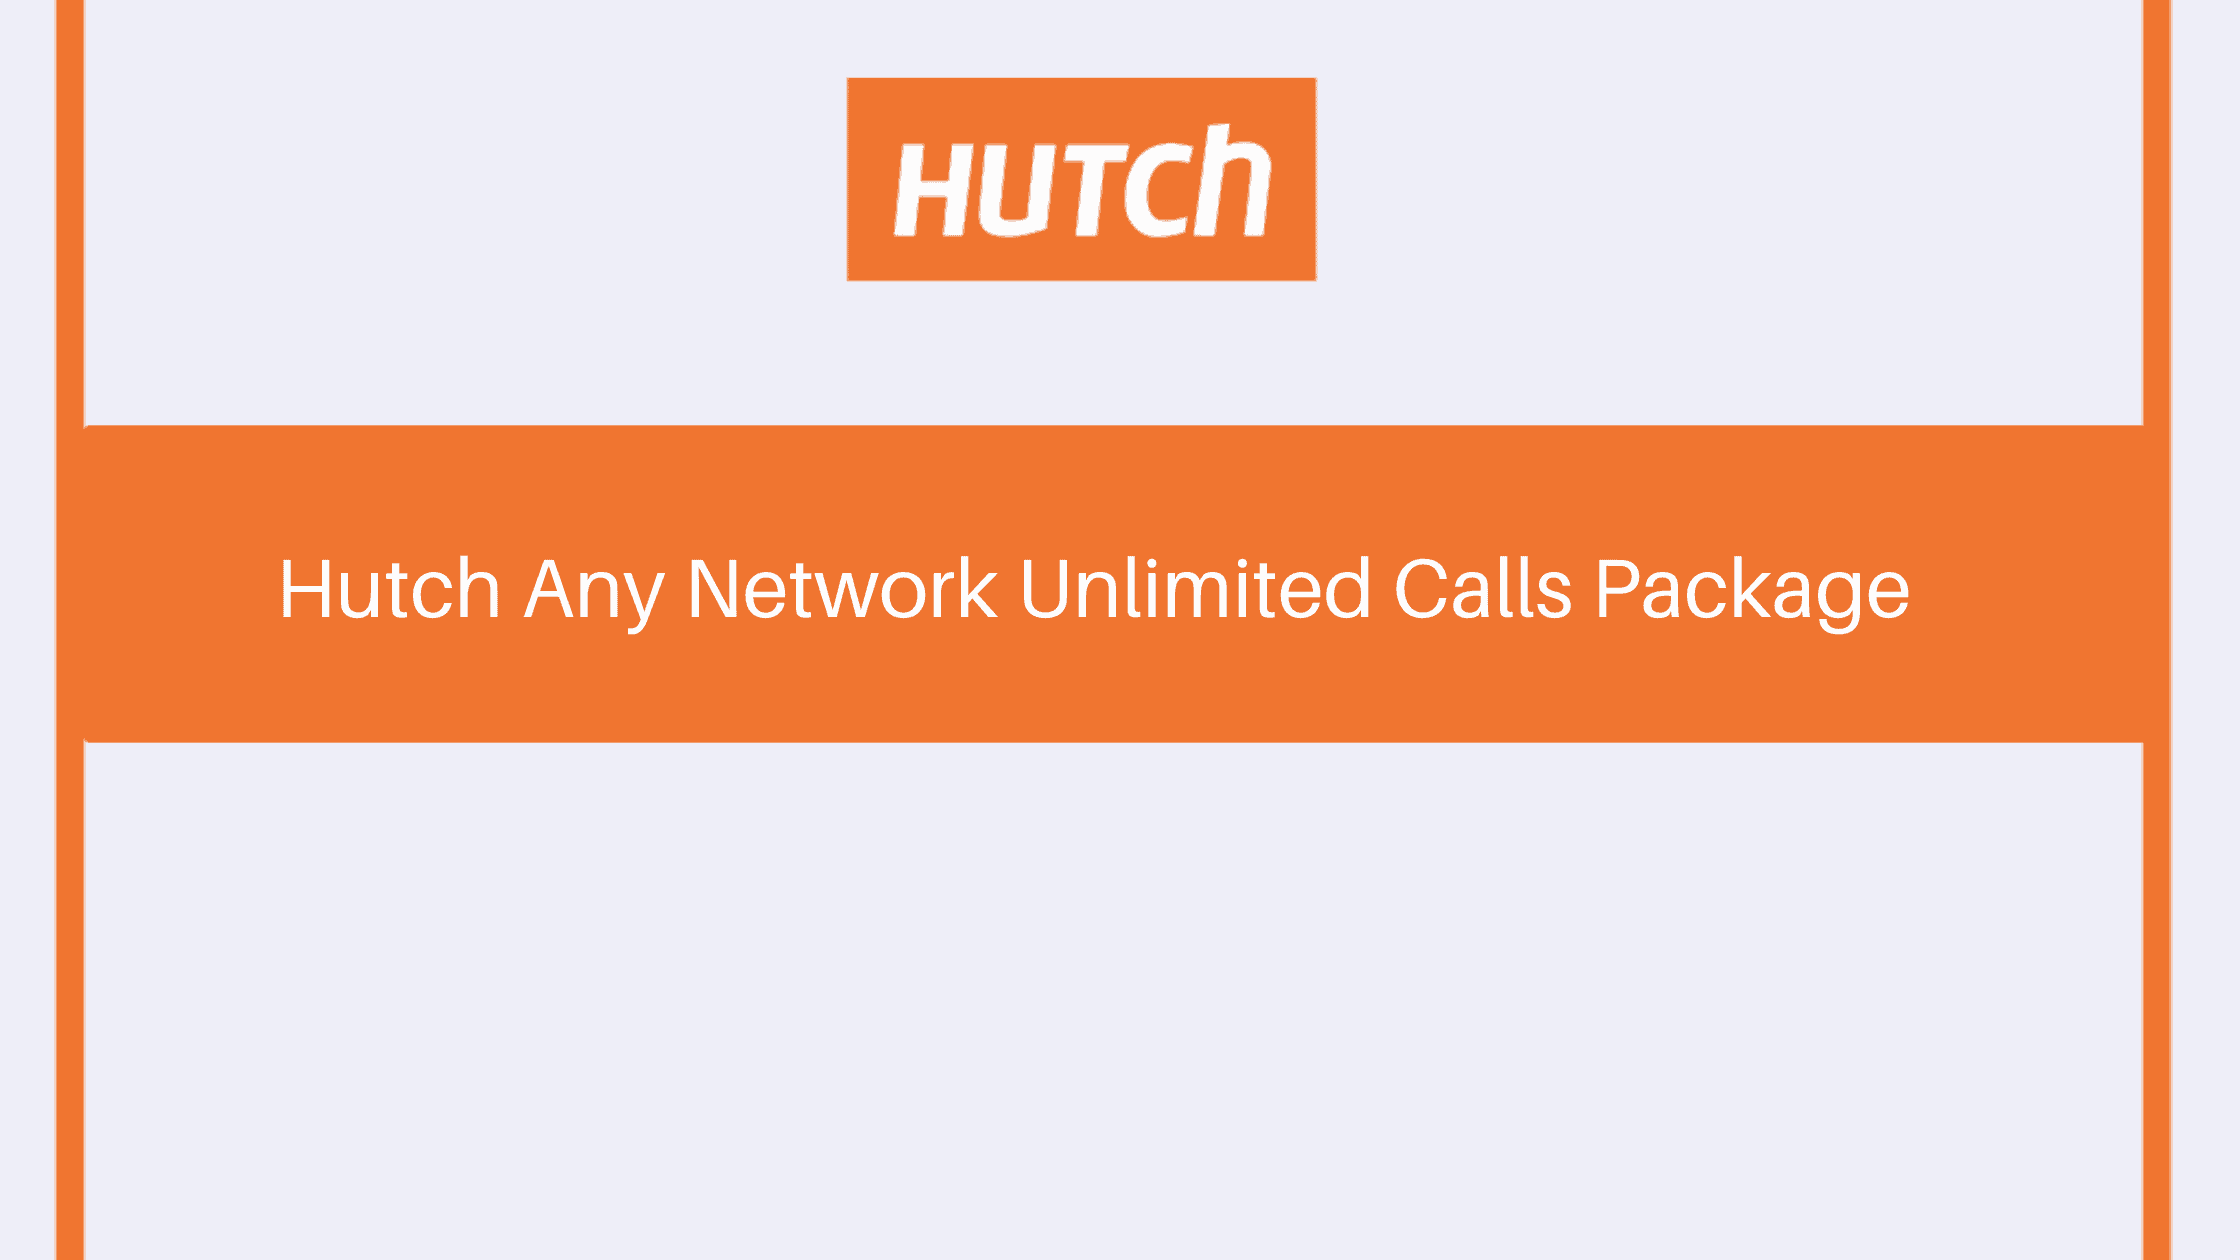 Hutch Any Network Unlimited Calls Package